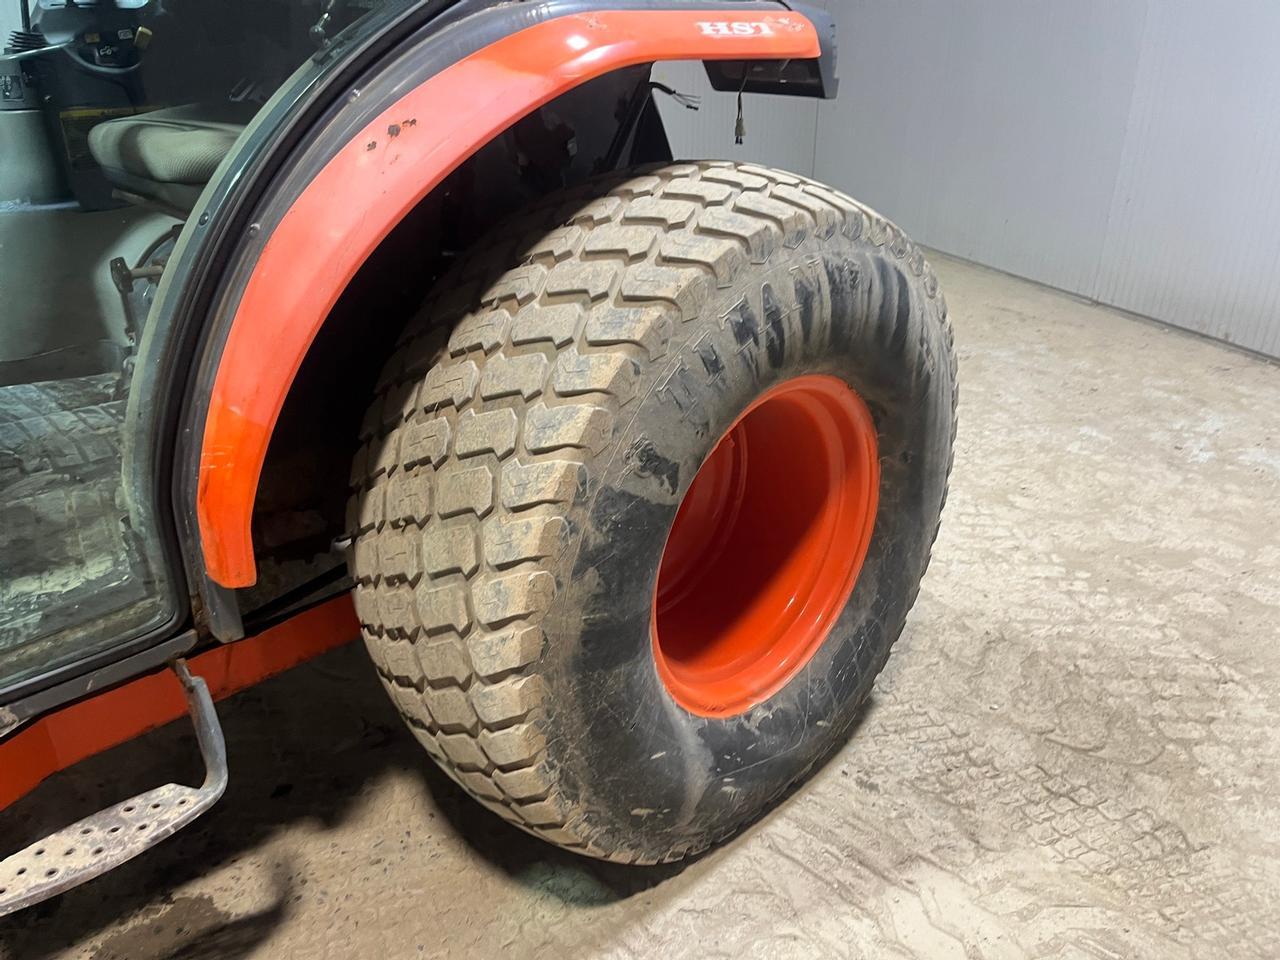 Kubota L3940 Tractor with Loader